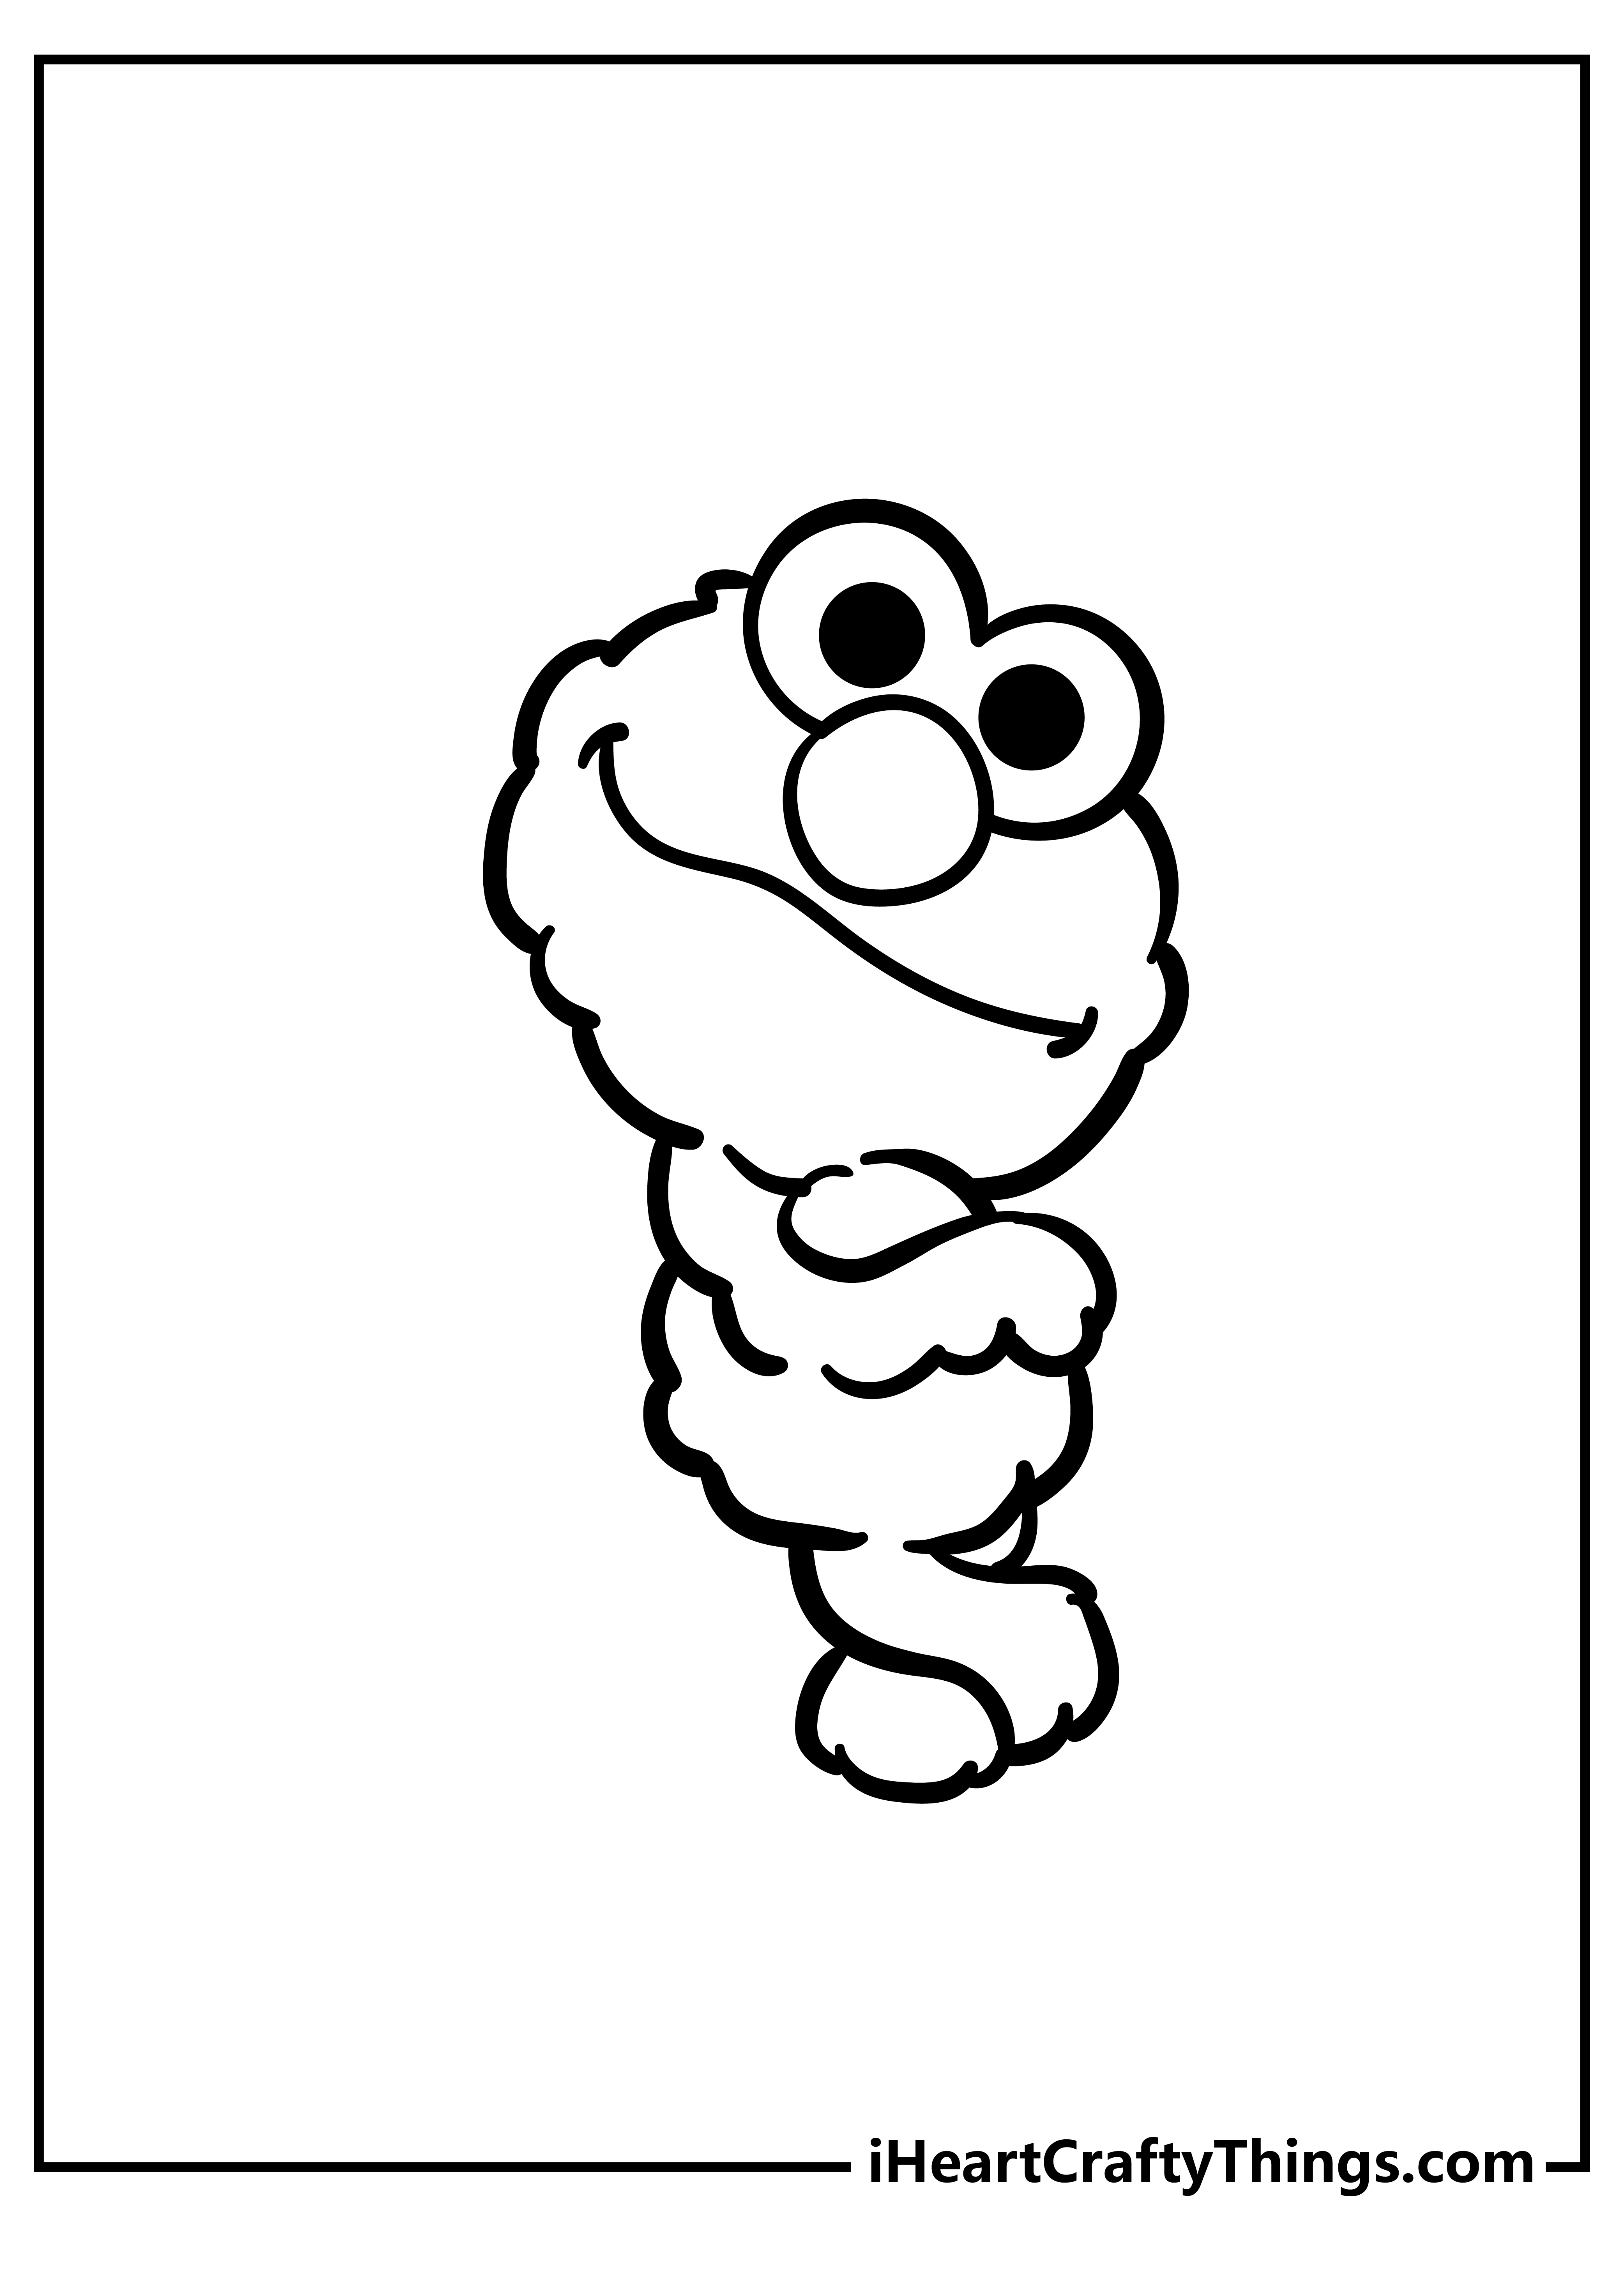 Elmo Coloring Book for adults free download